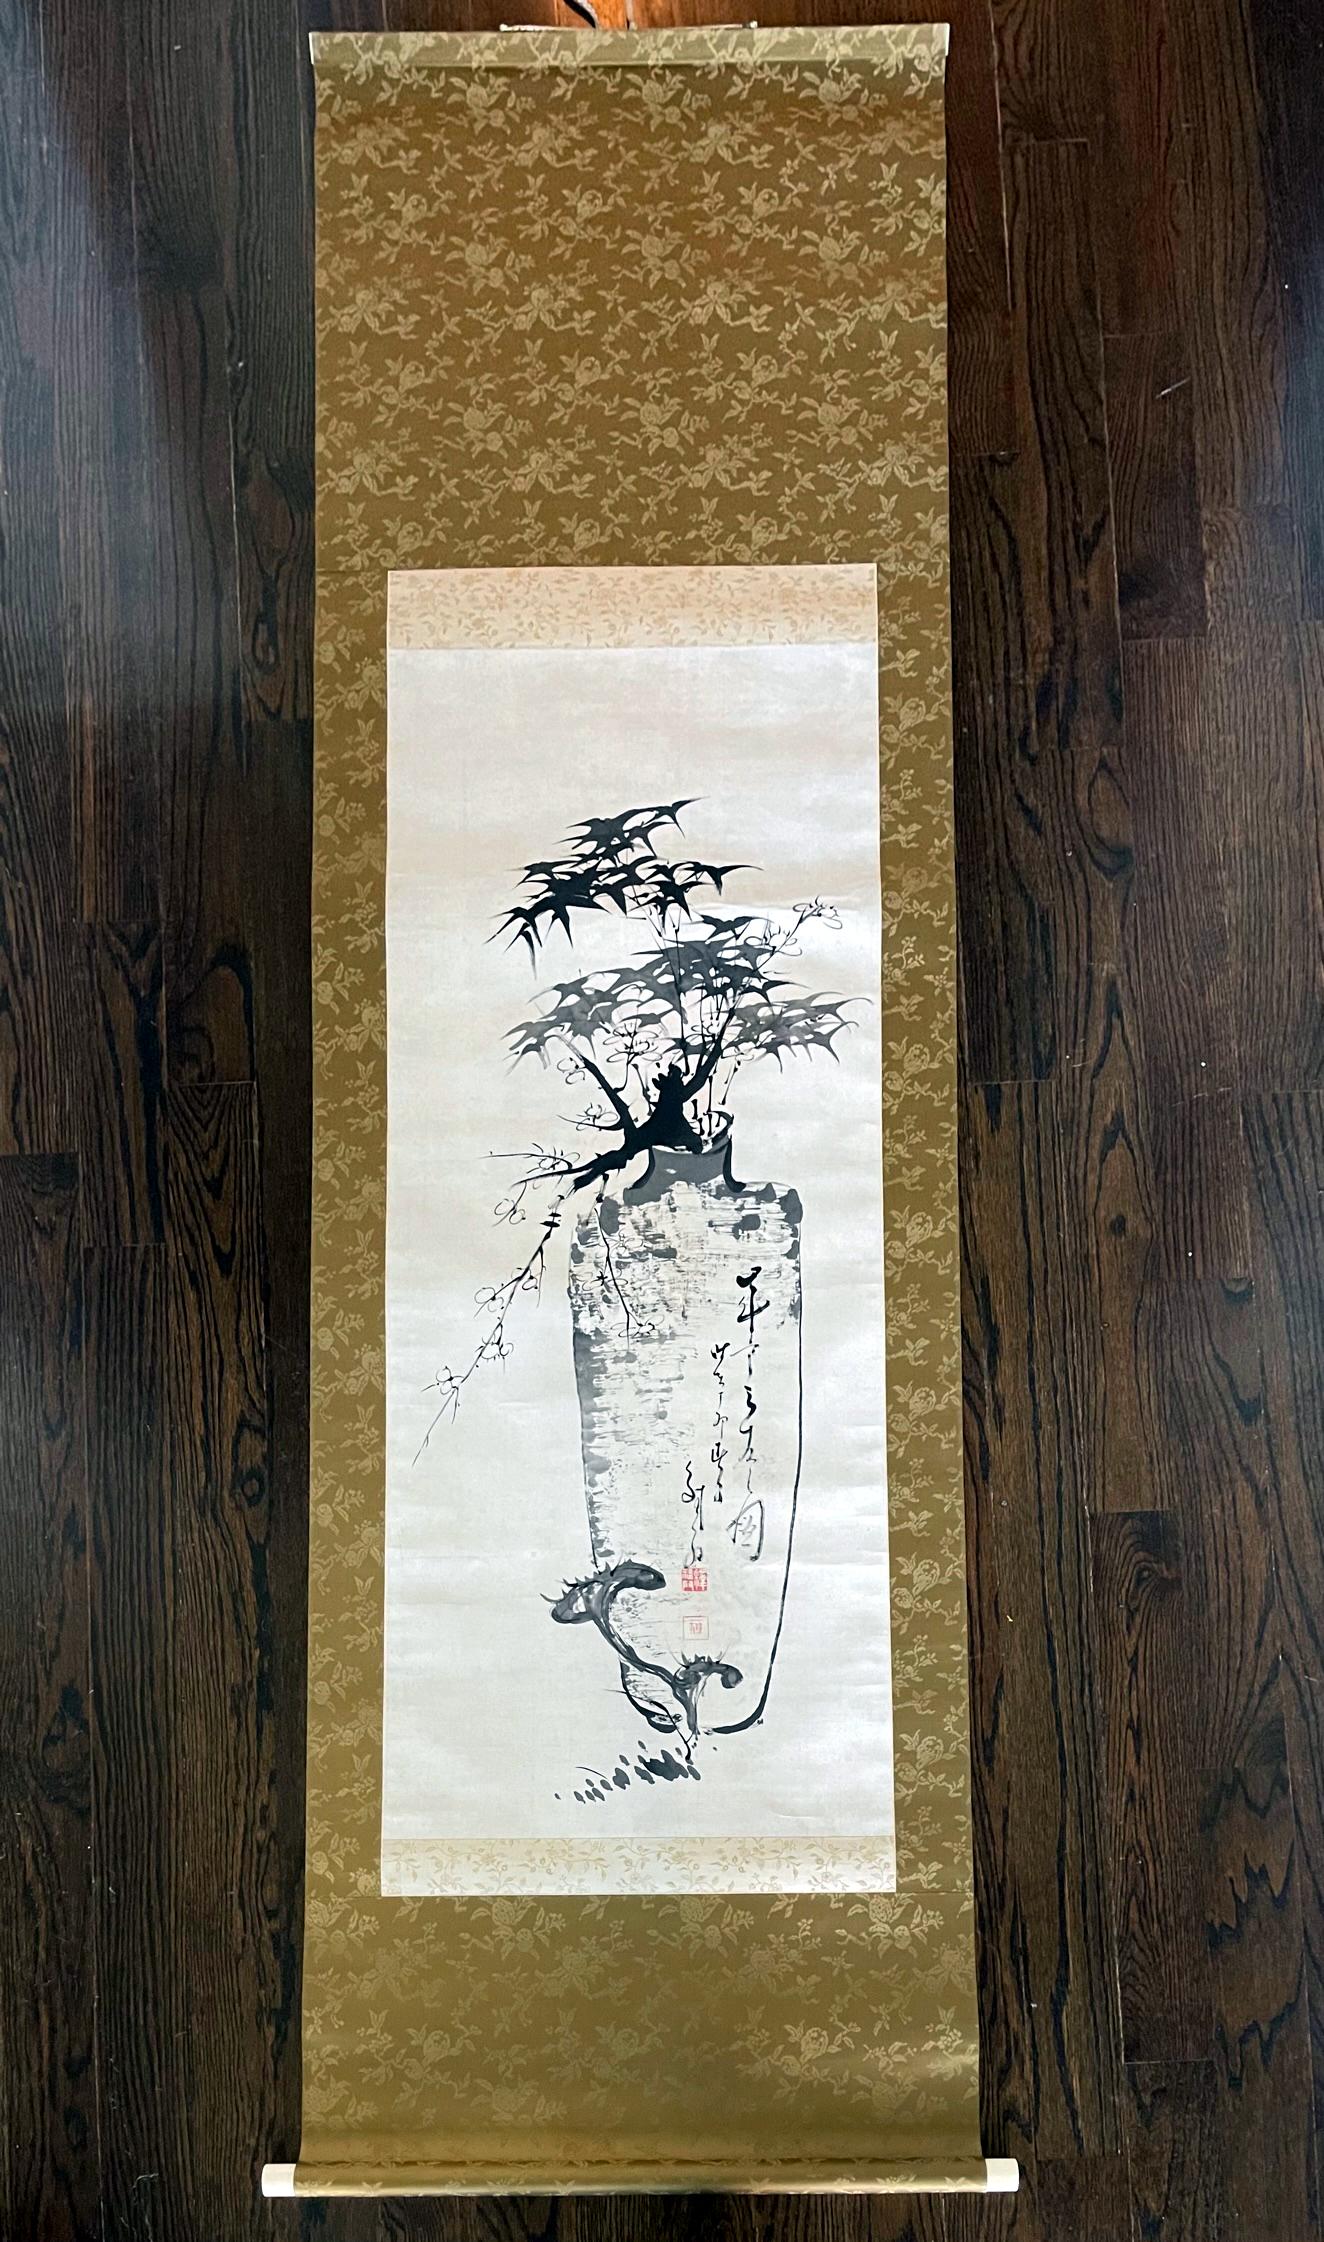 A hanging ink (Sumi-e) silk scroll by Japanese Zen artist Hidaka Tetsuo (1791-1871). Well presented in brocade boarders and mounted on paperback, this scroll depicts 